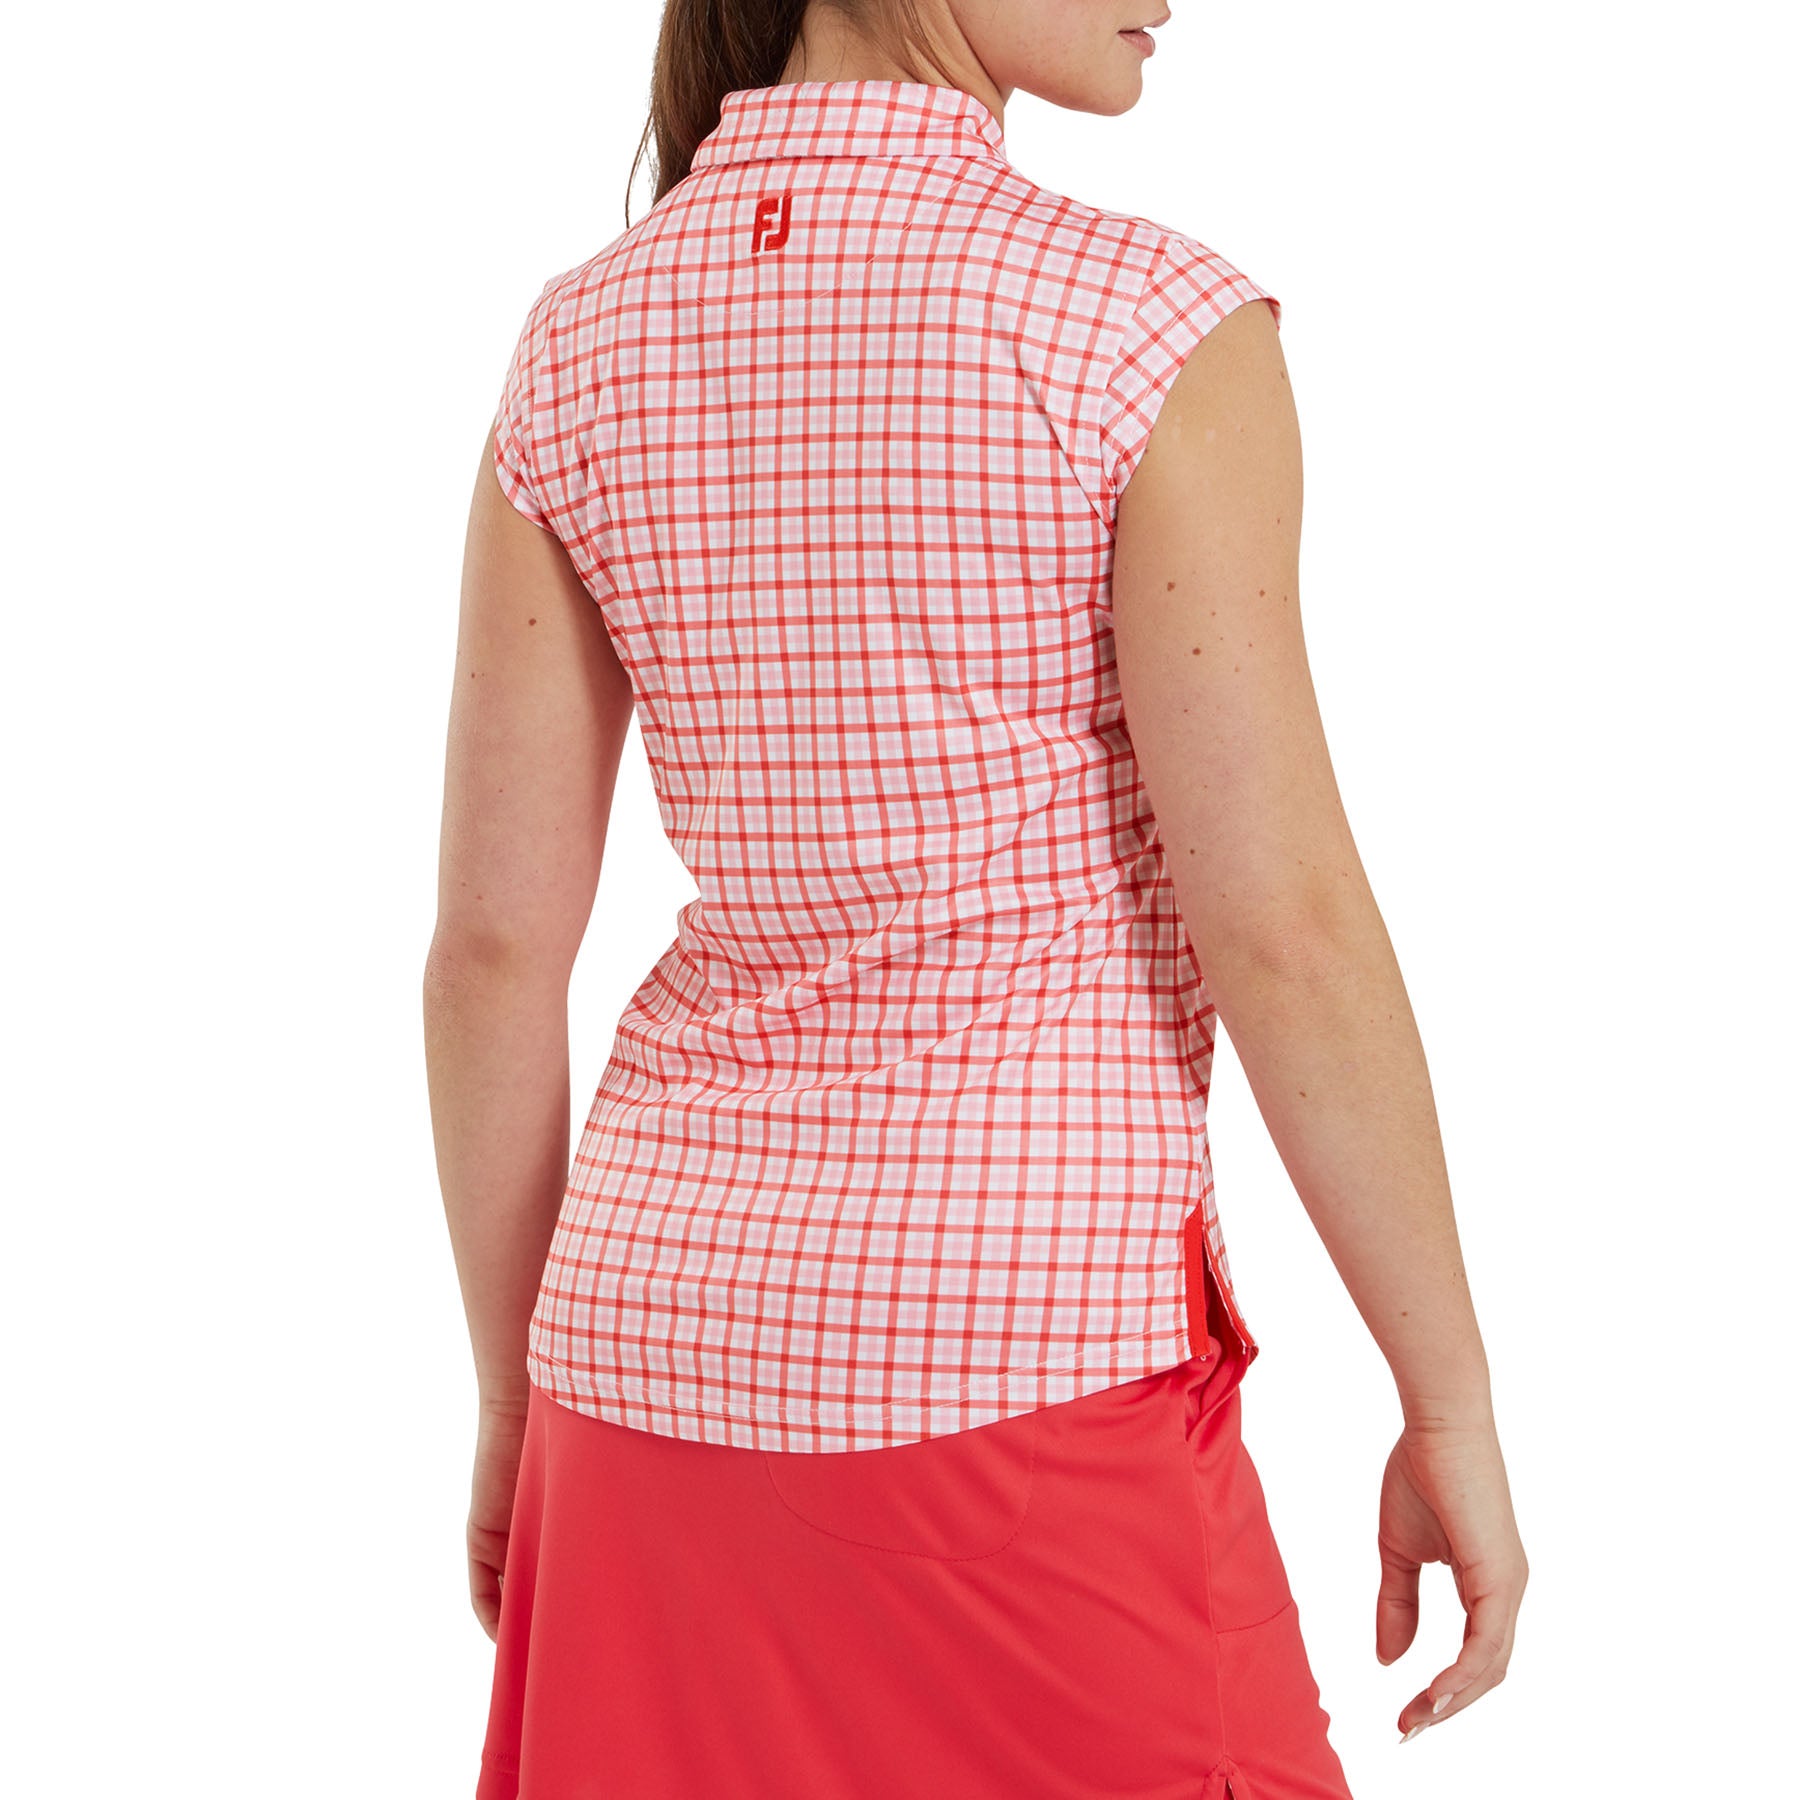 FootJoy Women's Cap Sleeve Polo in Pink & Red Gingham Print